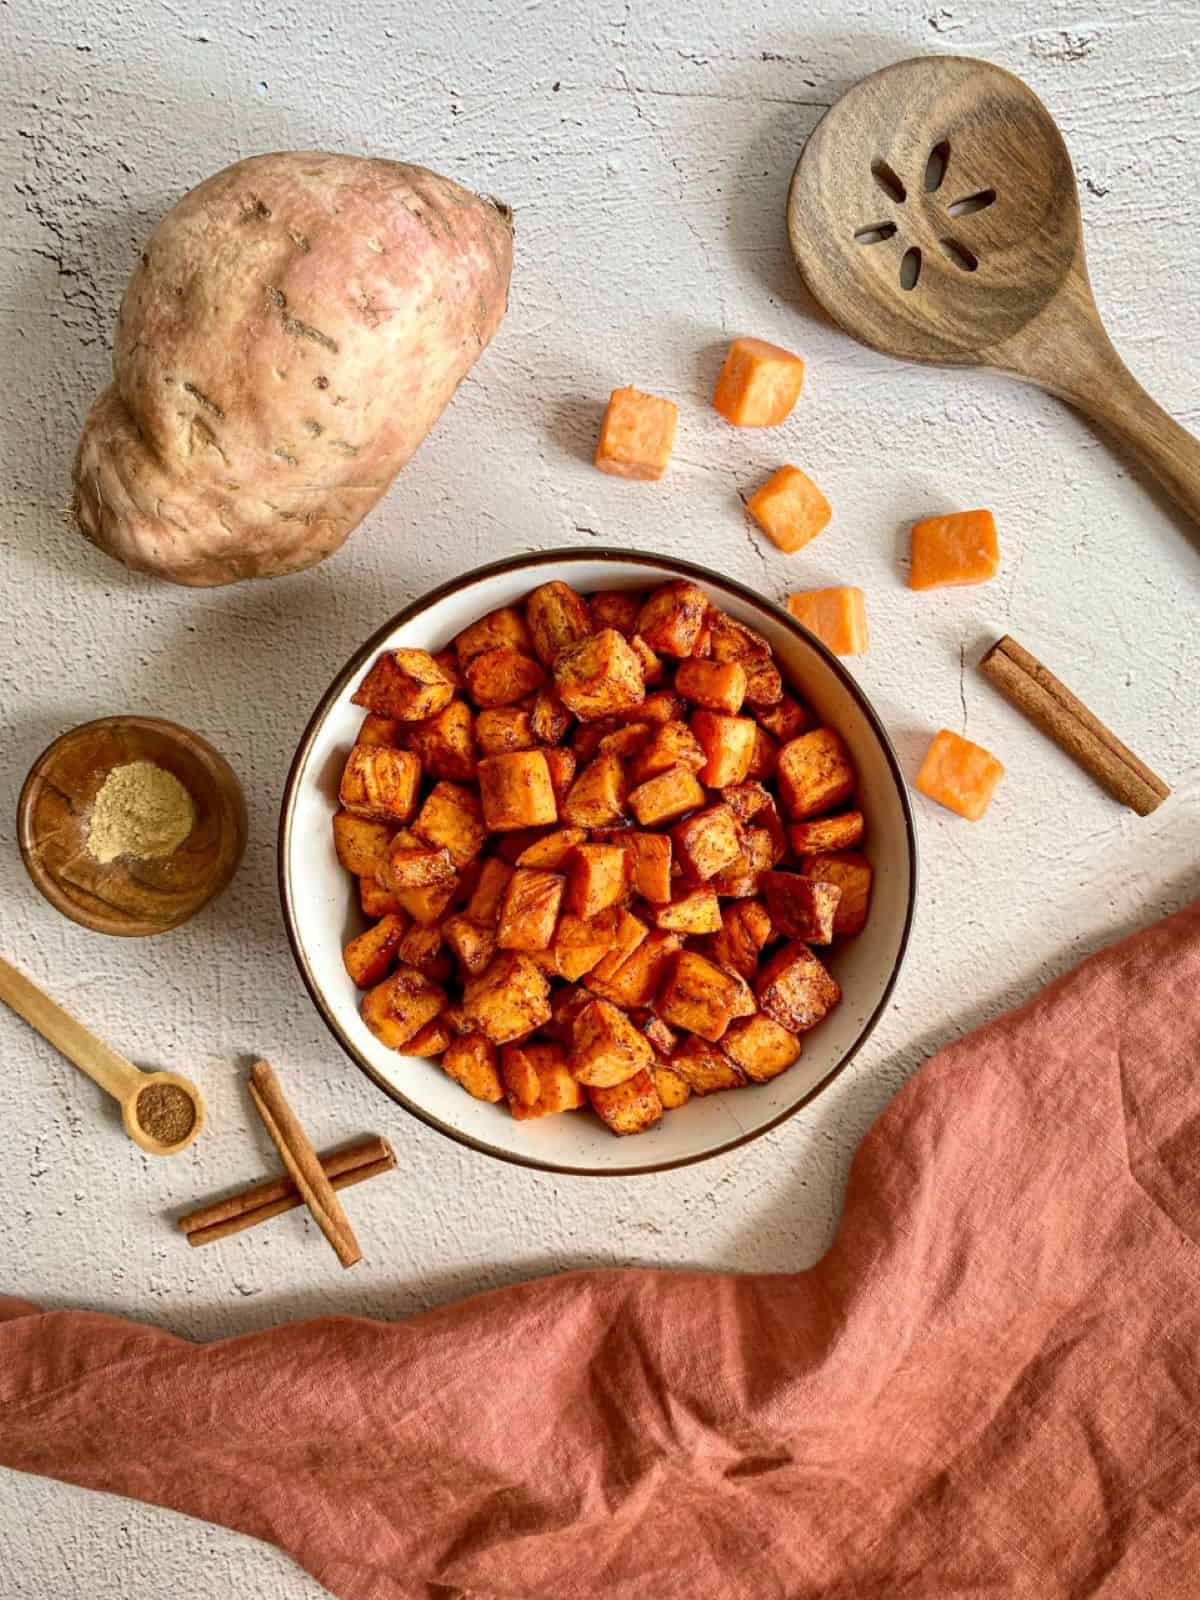 A bowl of air fried sweet potato chunks. Whole and cubed sweet potatoes, cinnamon sticks, and measuring spoons with nutmeg and ginger surround the bowl. A wooden spoon and rust colored towel are on the edges.